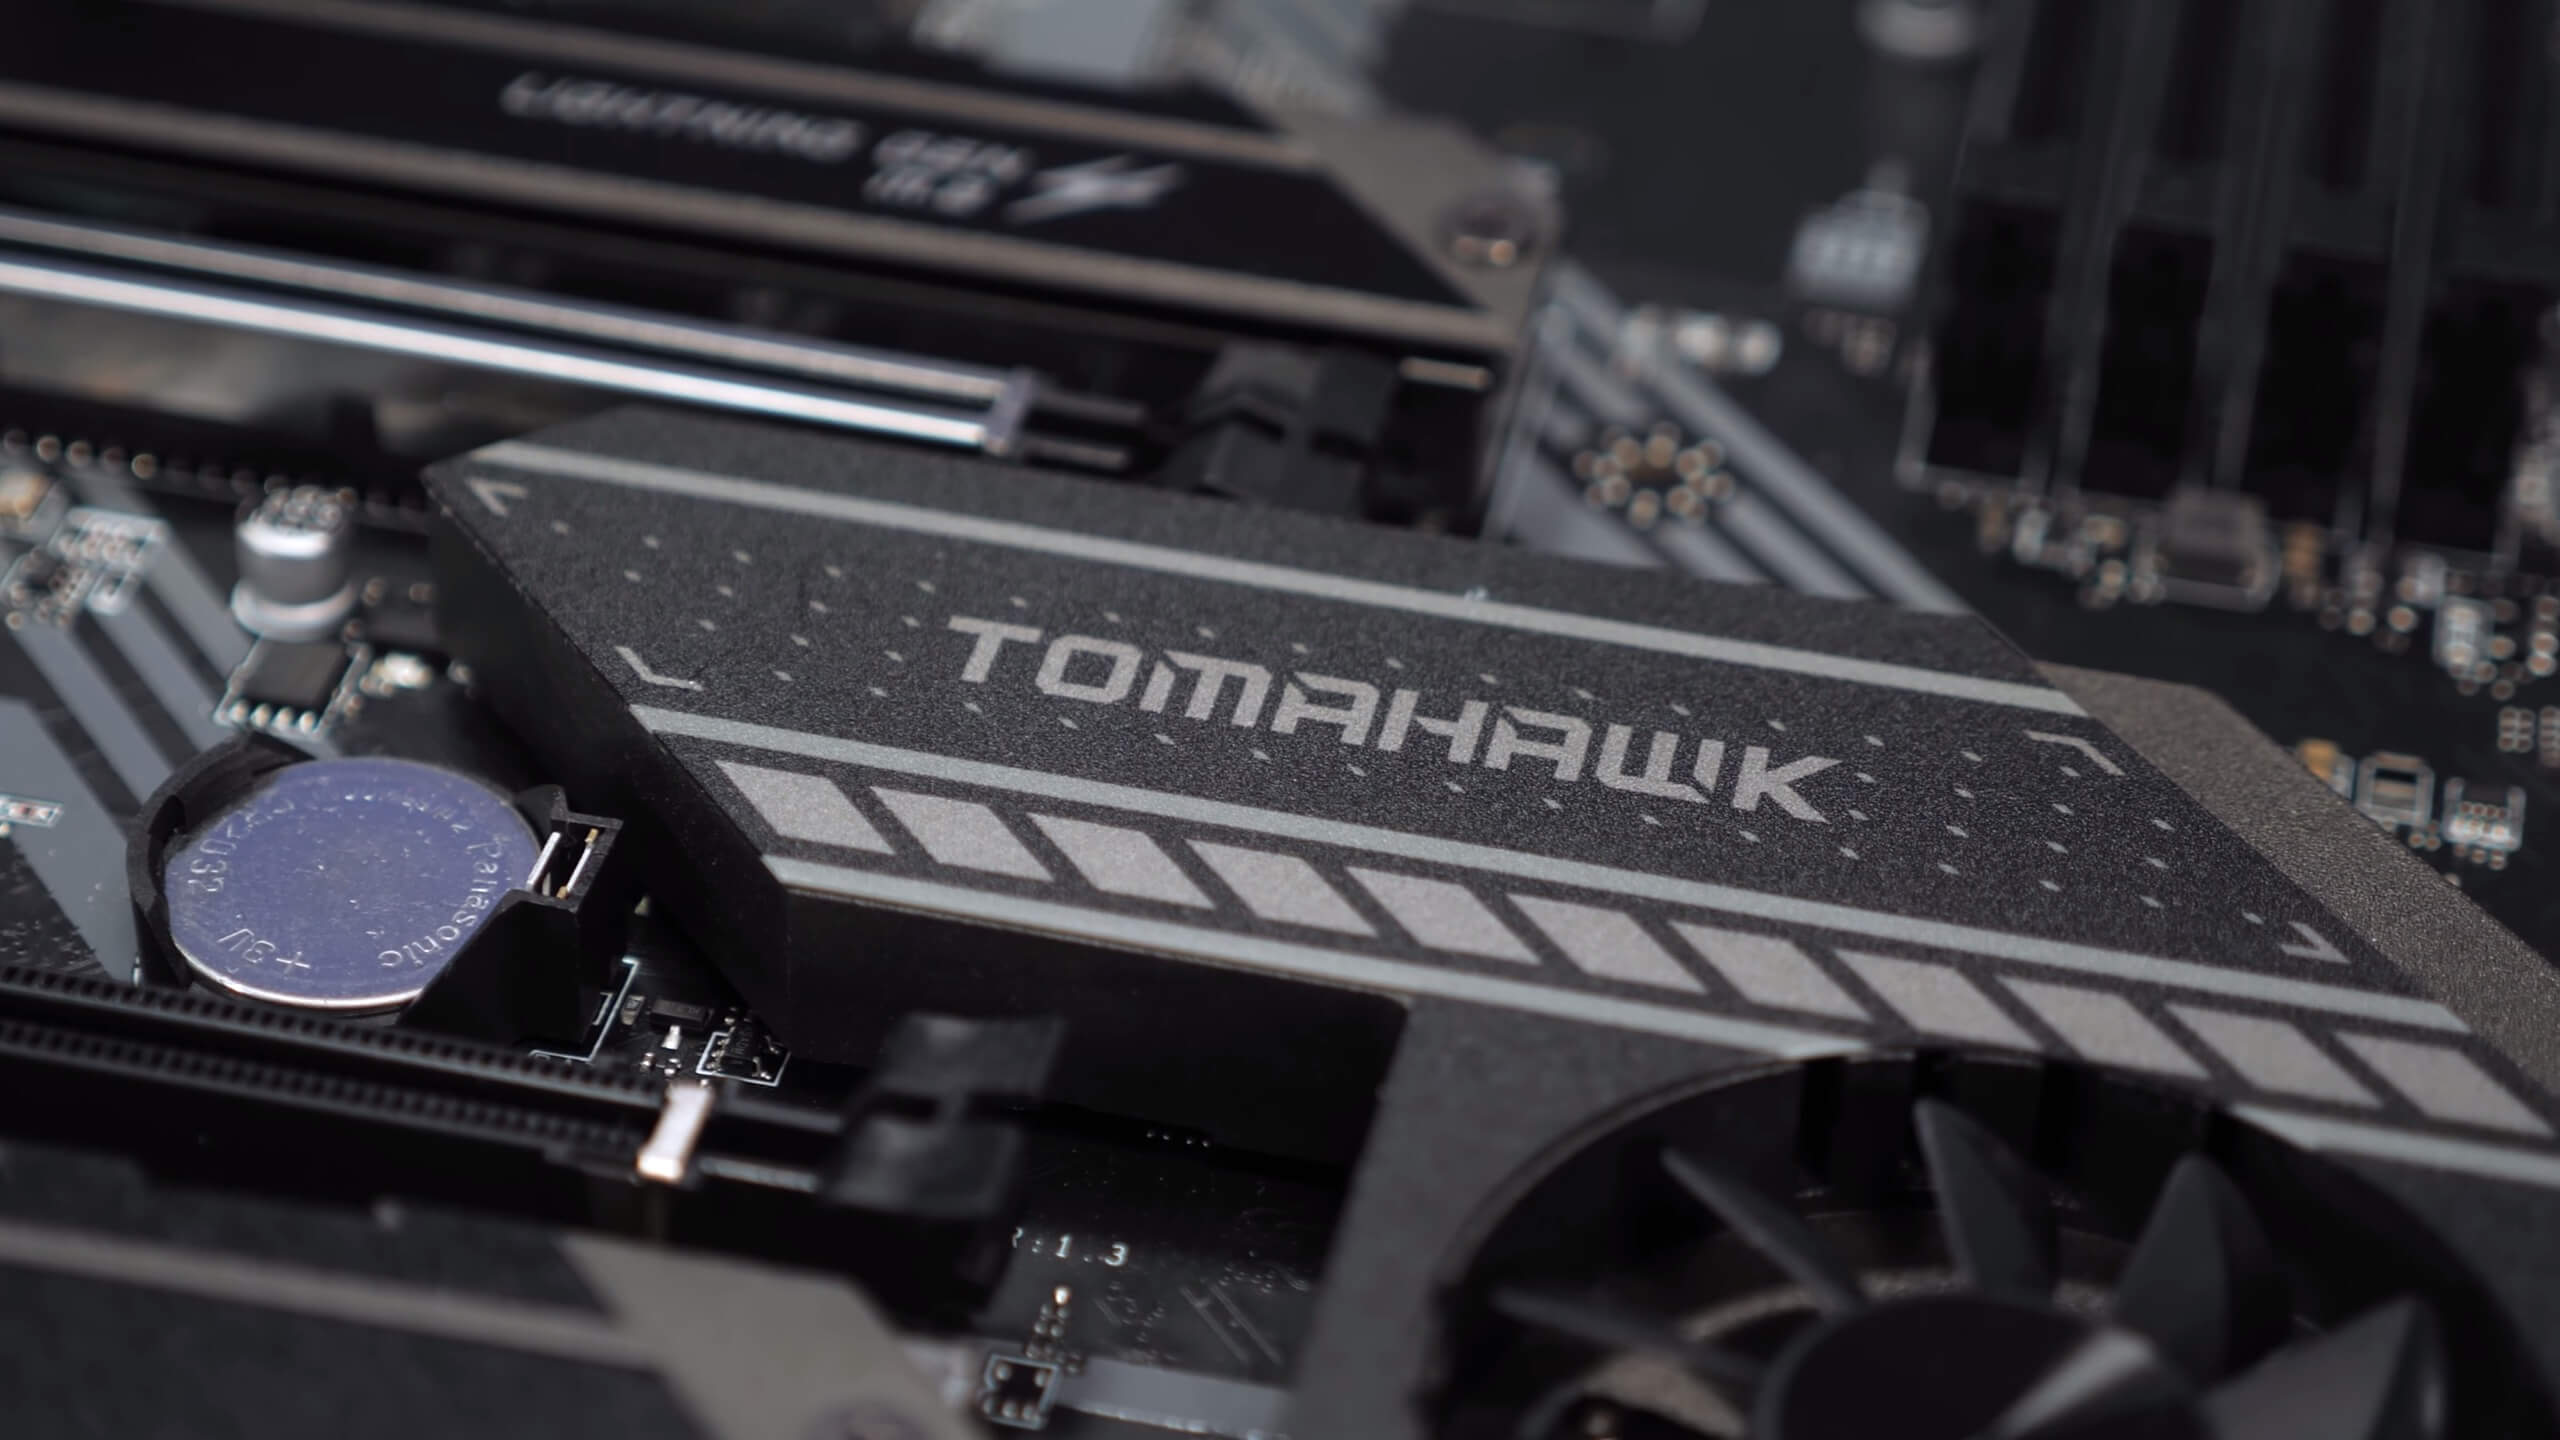 MSI X570 Tomahawk Motherboard Review 4